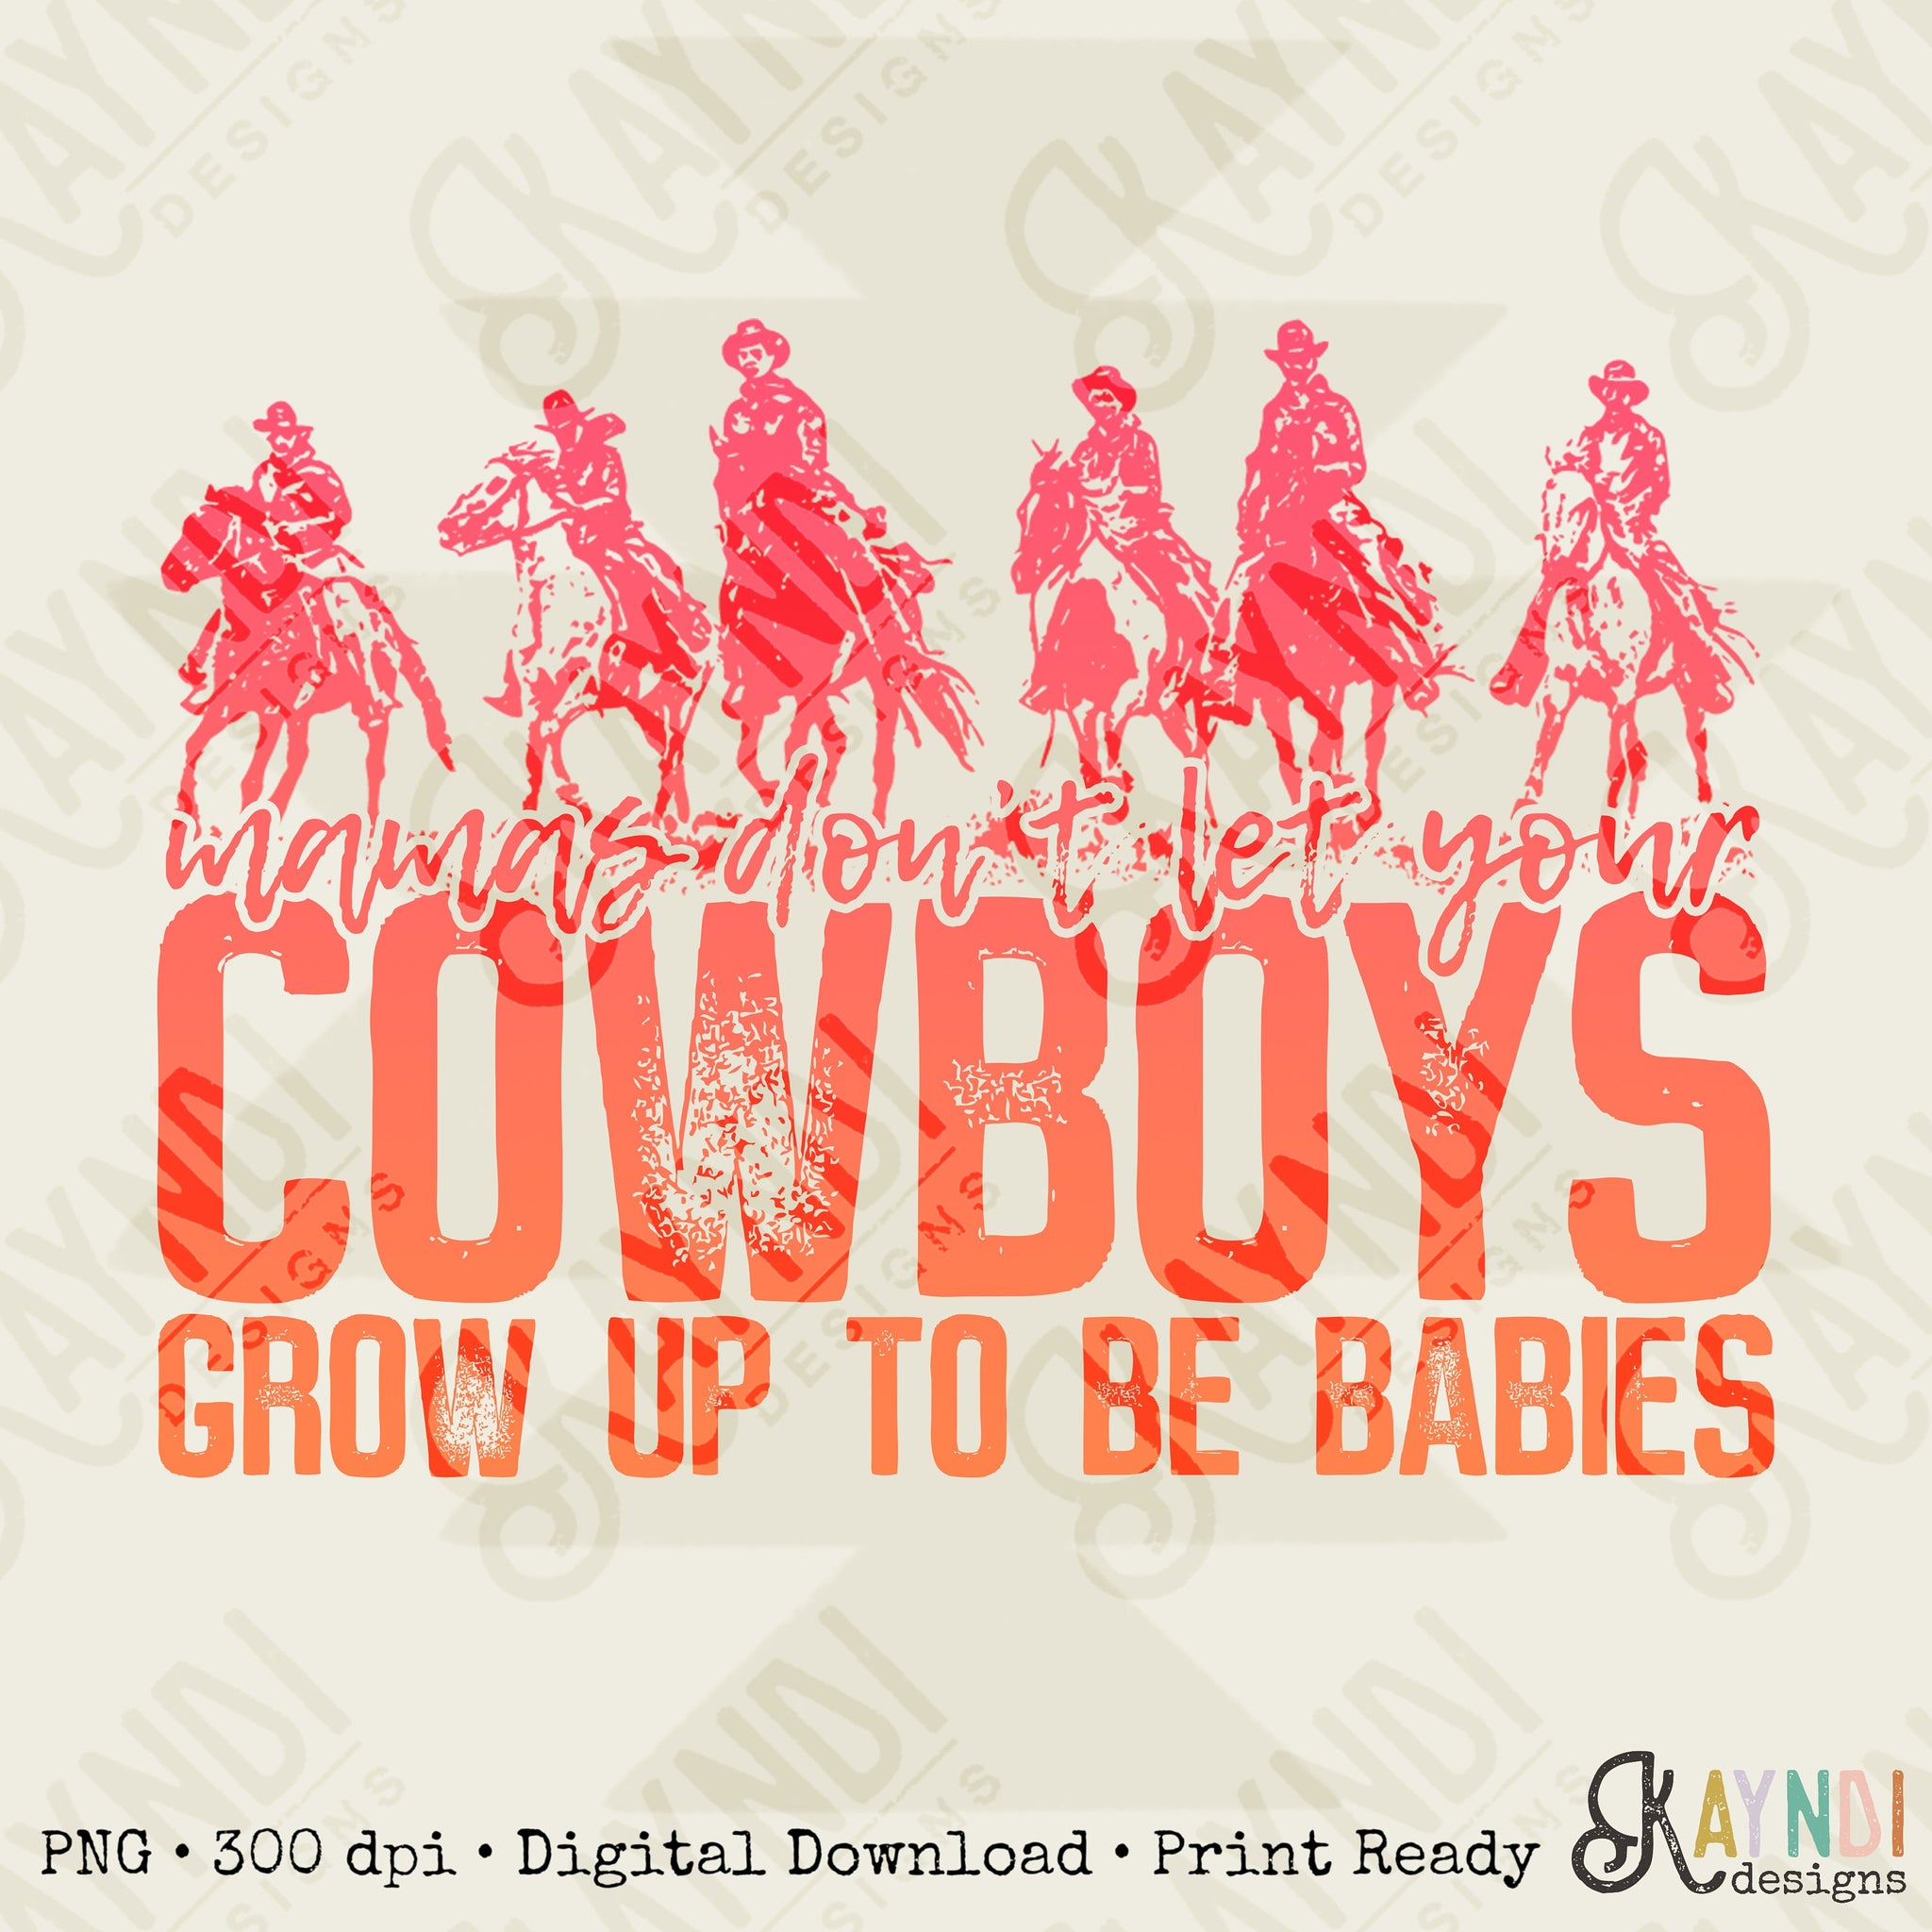 Mamas Don't Let Your Cowboys Grow Up to be Babies Sublimation Design PNG Digital Download Printable